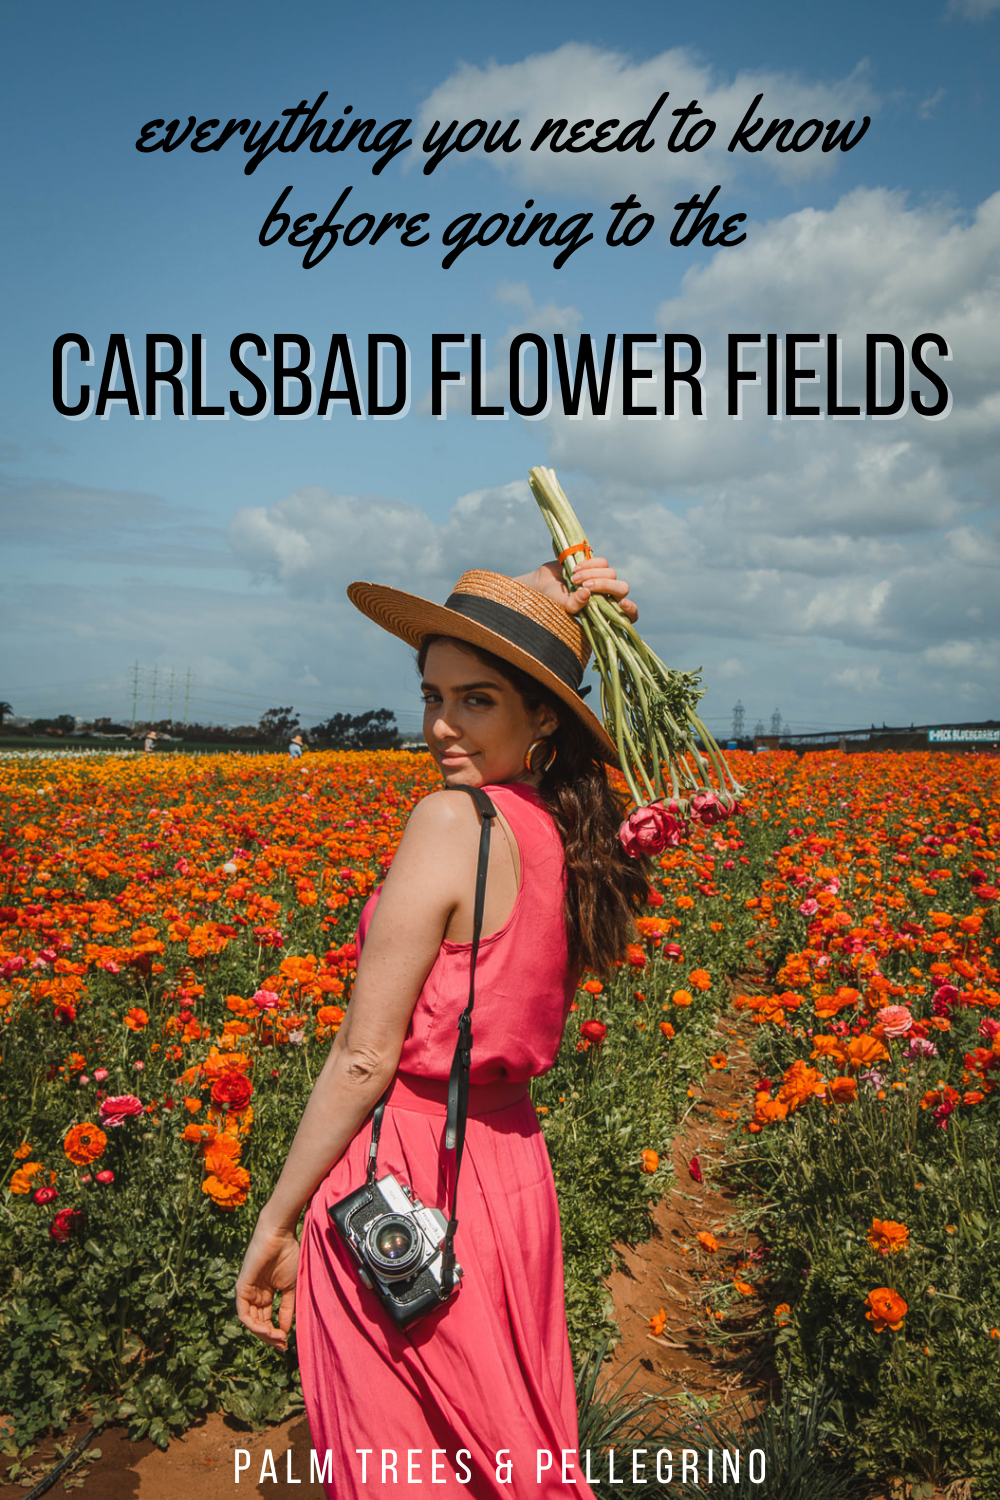 Tips for Visiting the The Carlsbad Flower Fields - Palm Trees and Pellegrino, San Diego things to do, San Diego flower fields